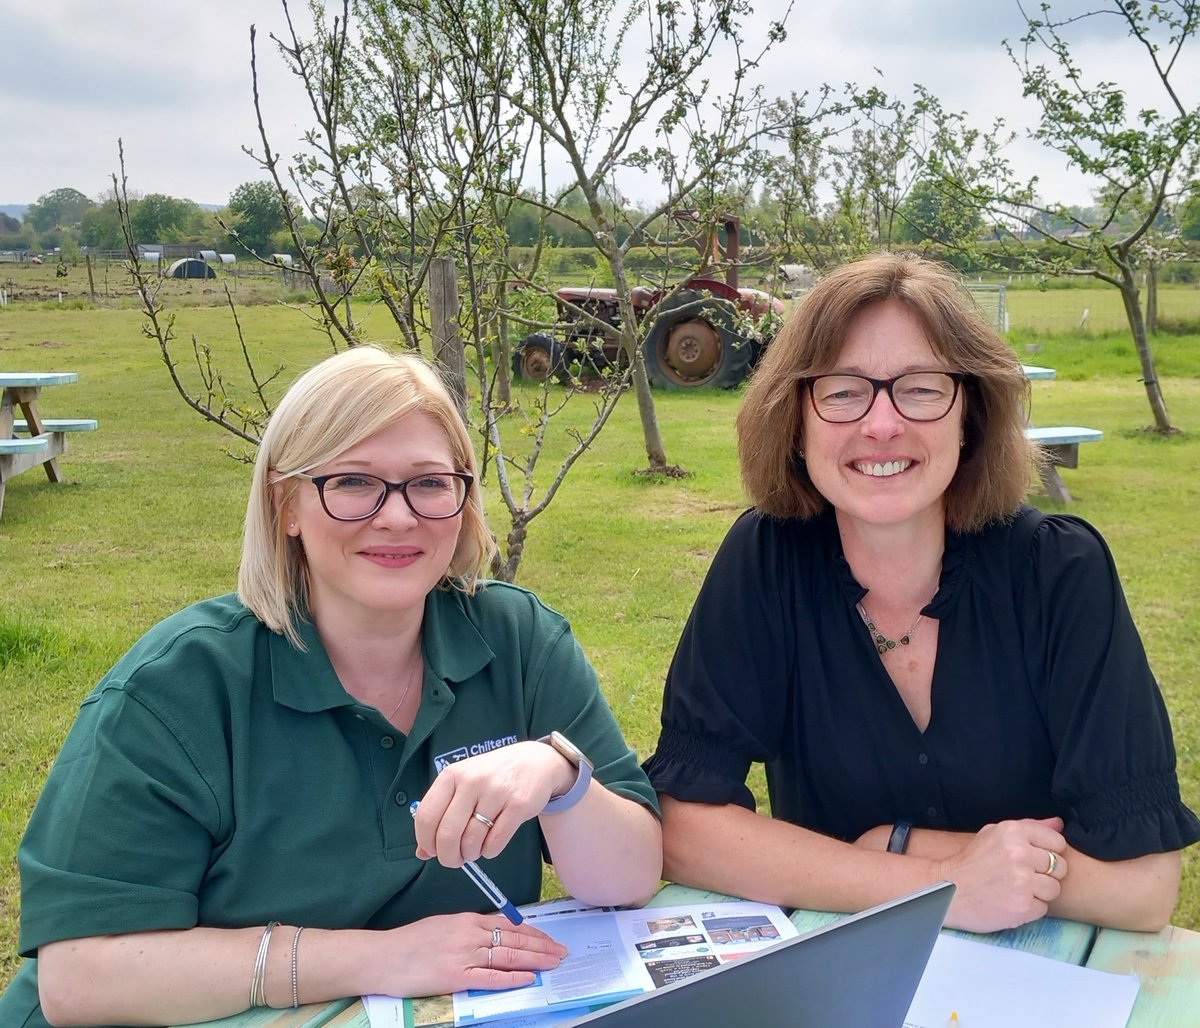 An energising day today - a morning @OrchardViewFarm with my brilliant #Communications Mgr, Vicki, planning our forthcoming Outstanding #Chilterns magazine (& buying delicious sausages), then a walk & chat with @DrewBennellick @HeritageFundUK. #lovemyjob #Chilterns #landscape